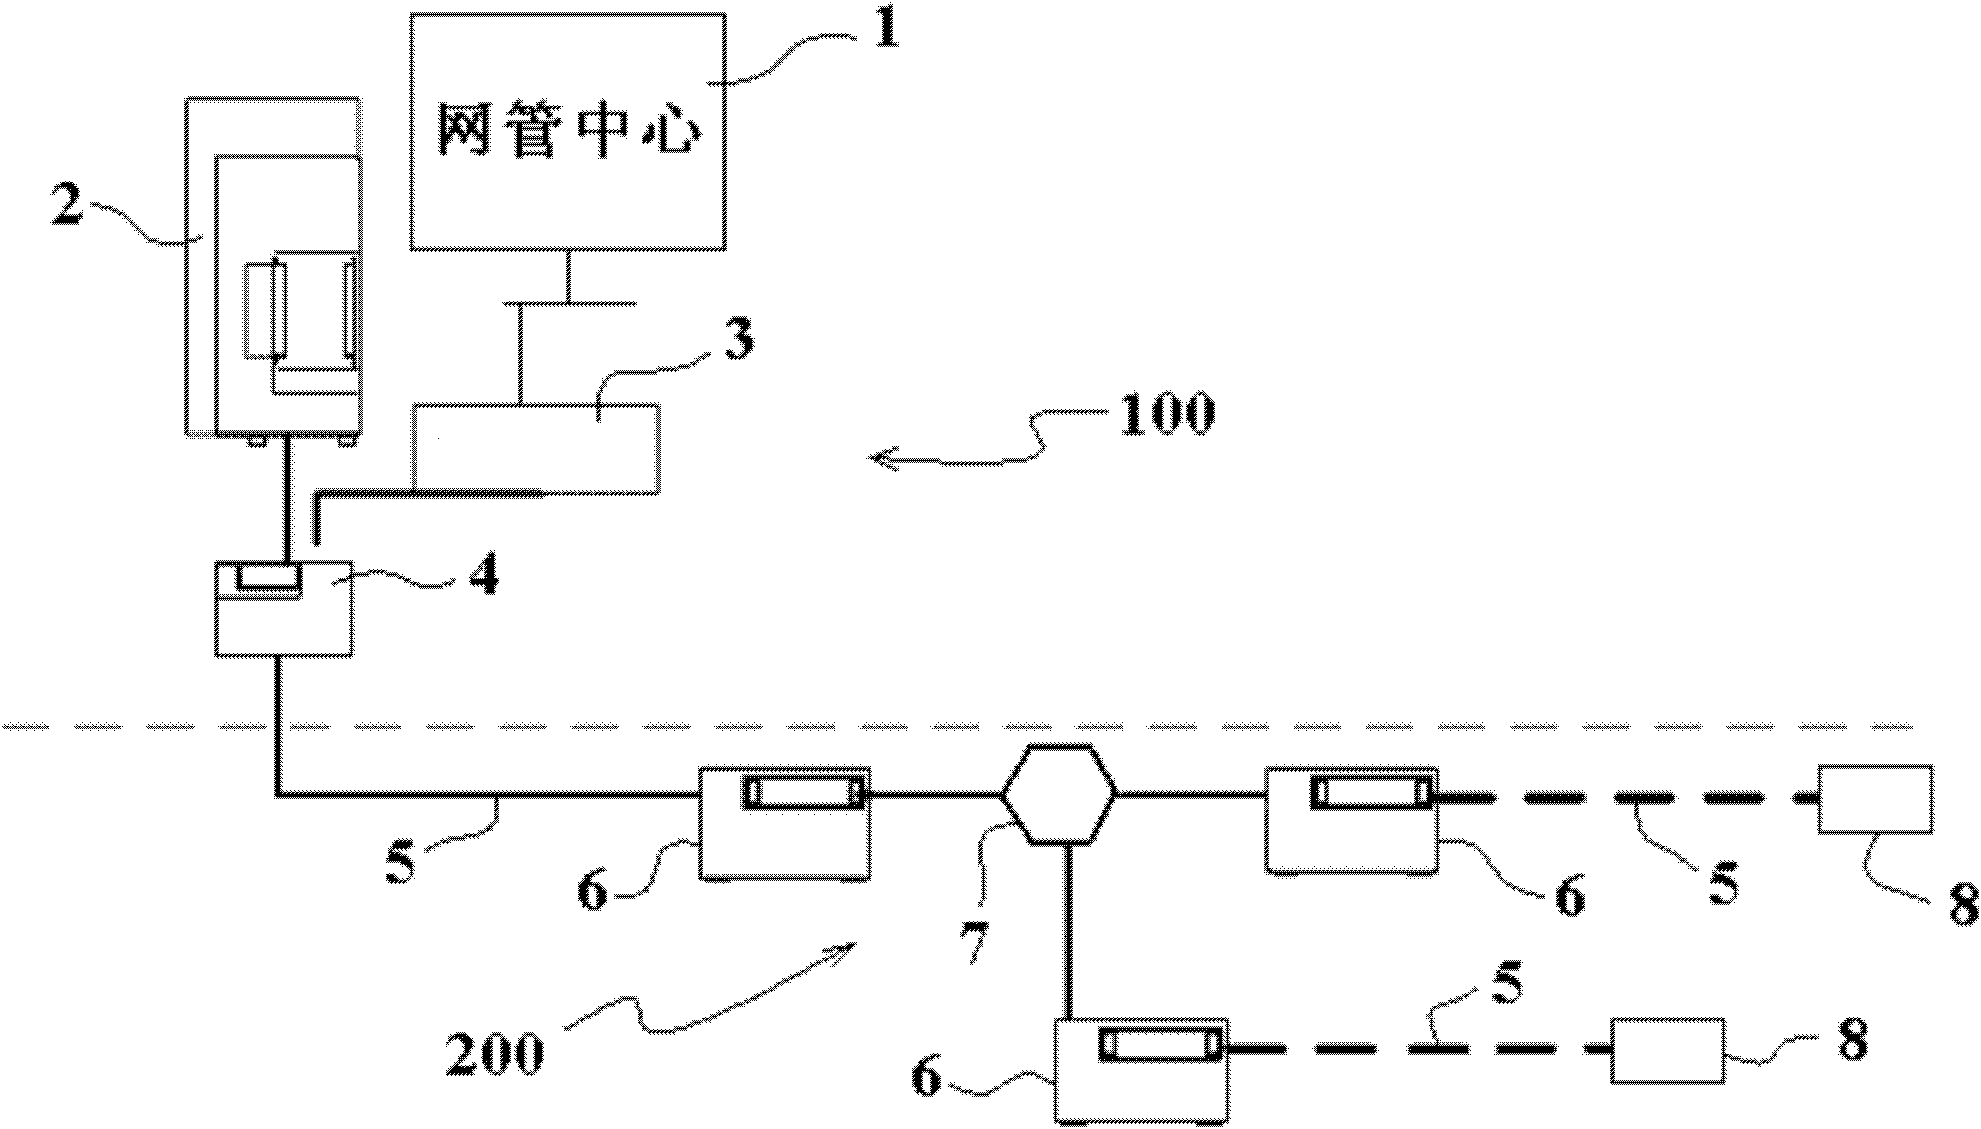 Leakage communication system with fault location and method